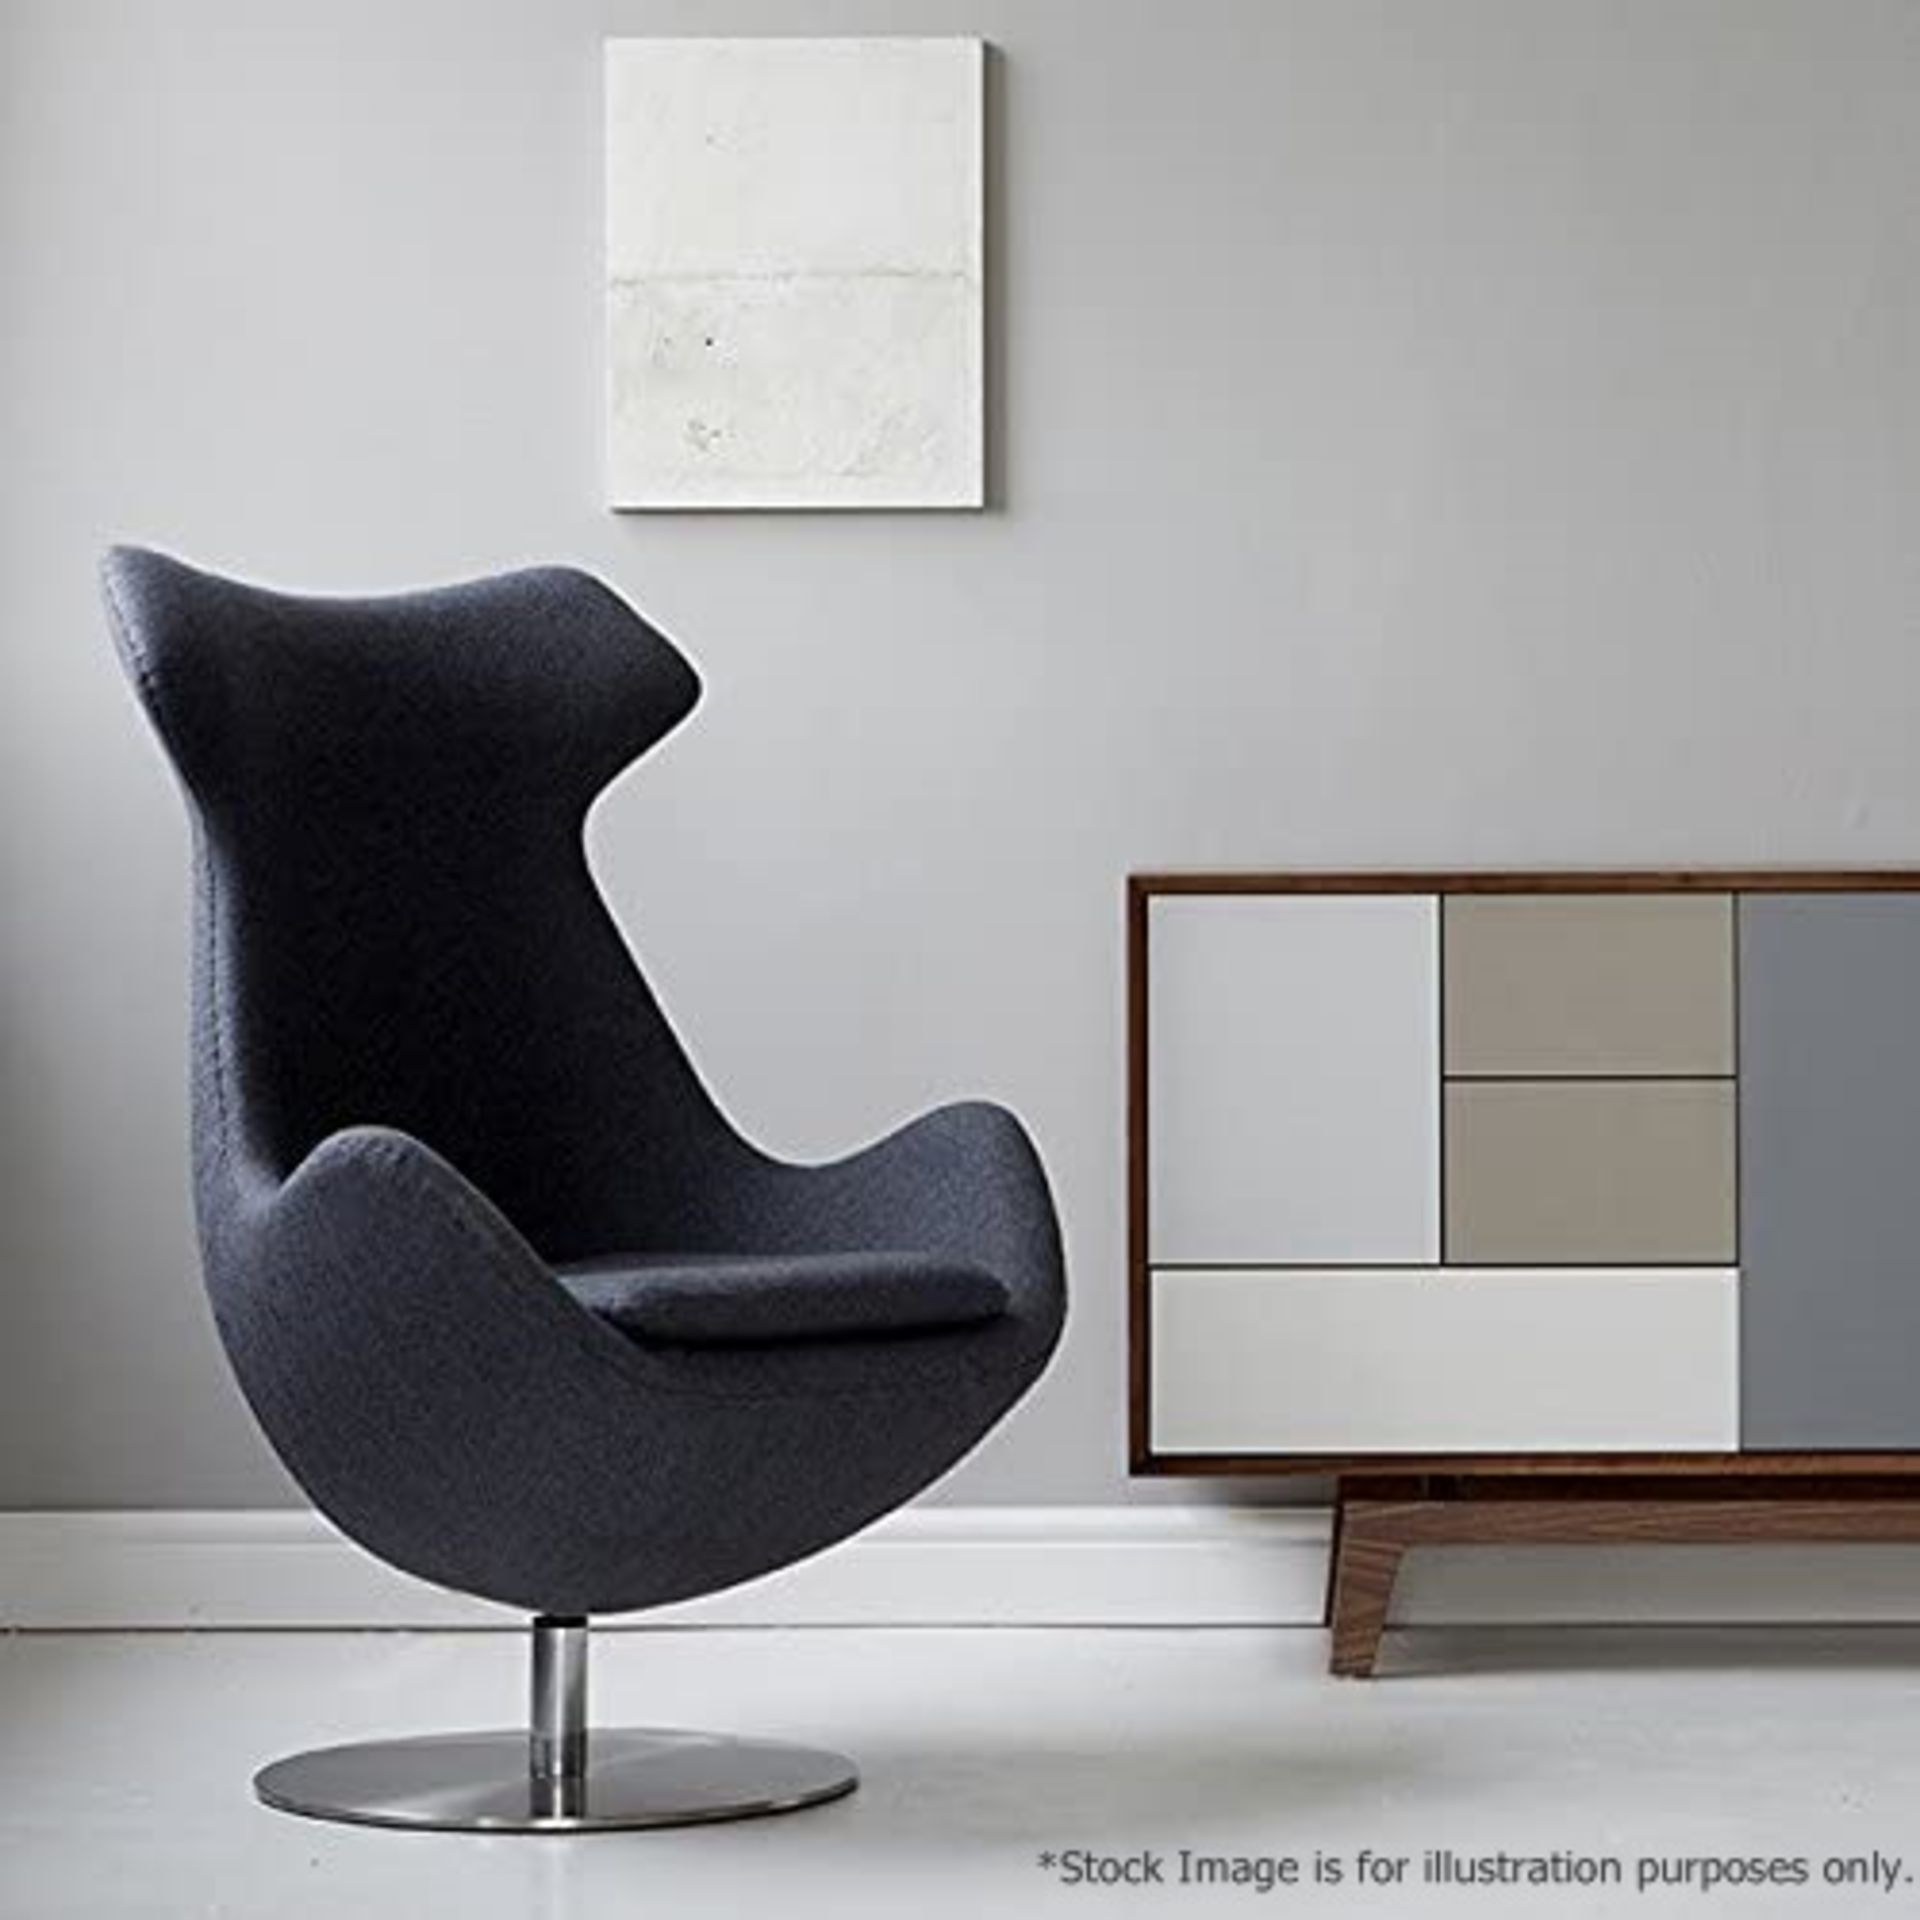 1 x Arne Jacobsen-Inspired Egg Lounge Chair - Upholstered In Grey Cashmere With Steel Base